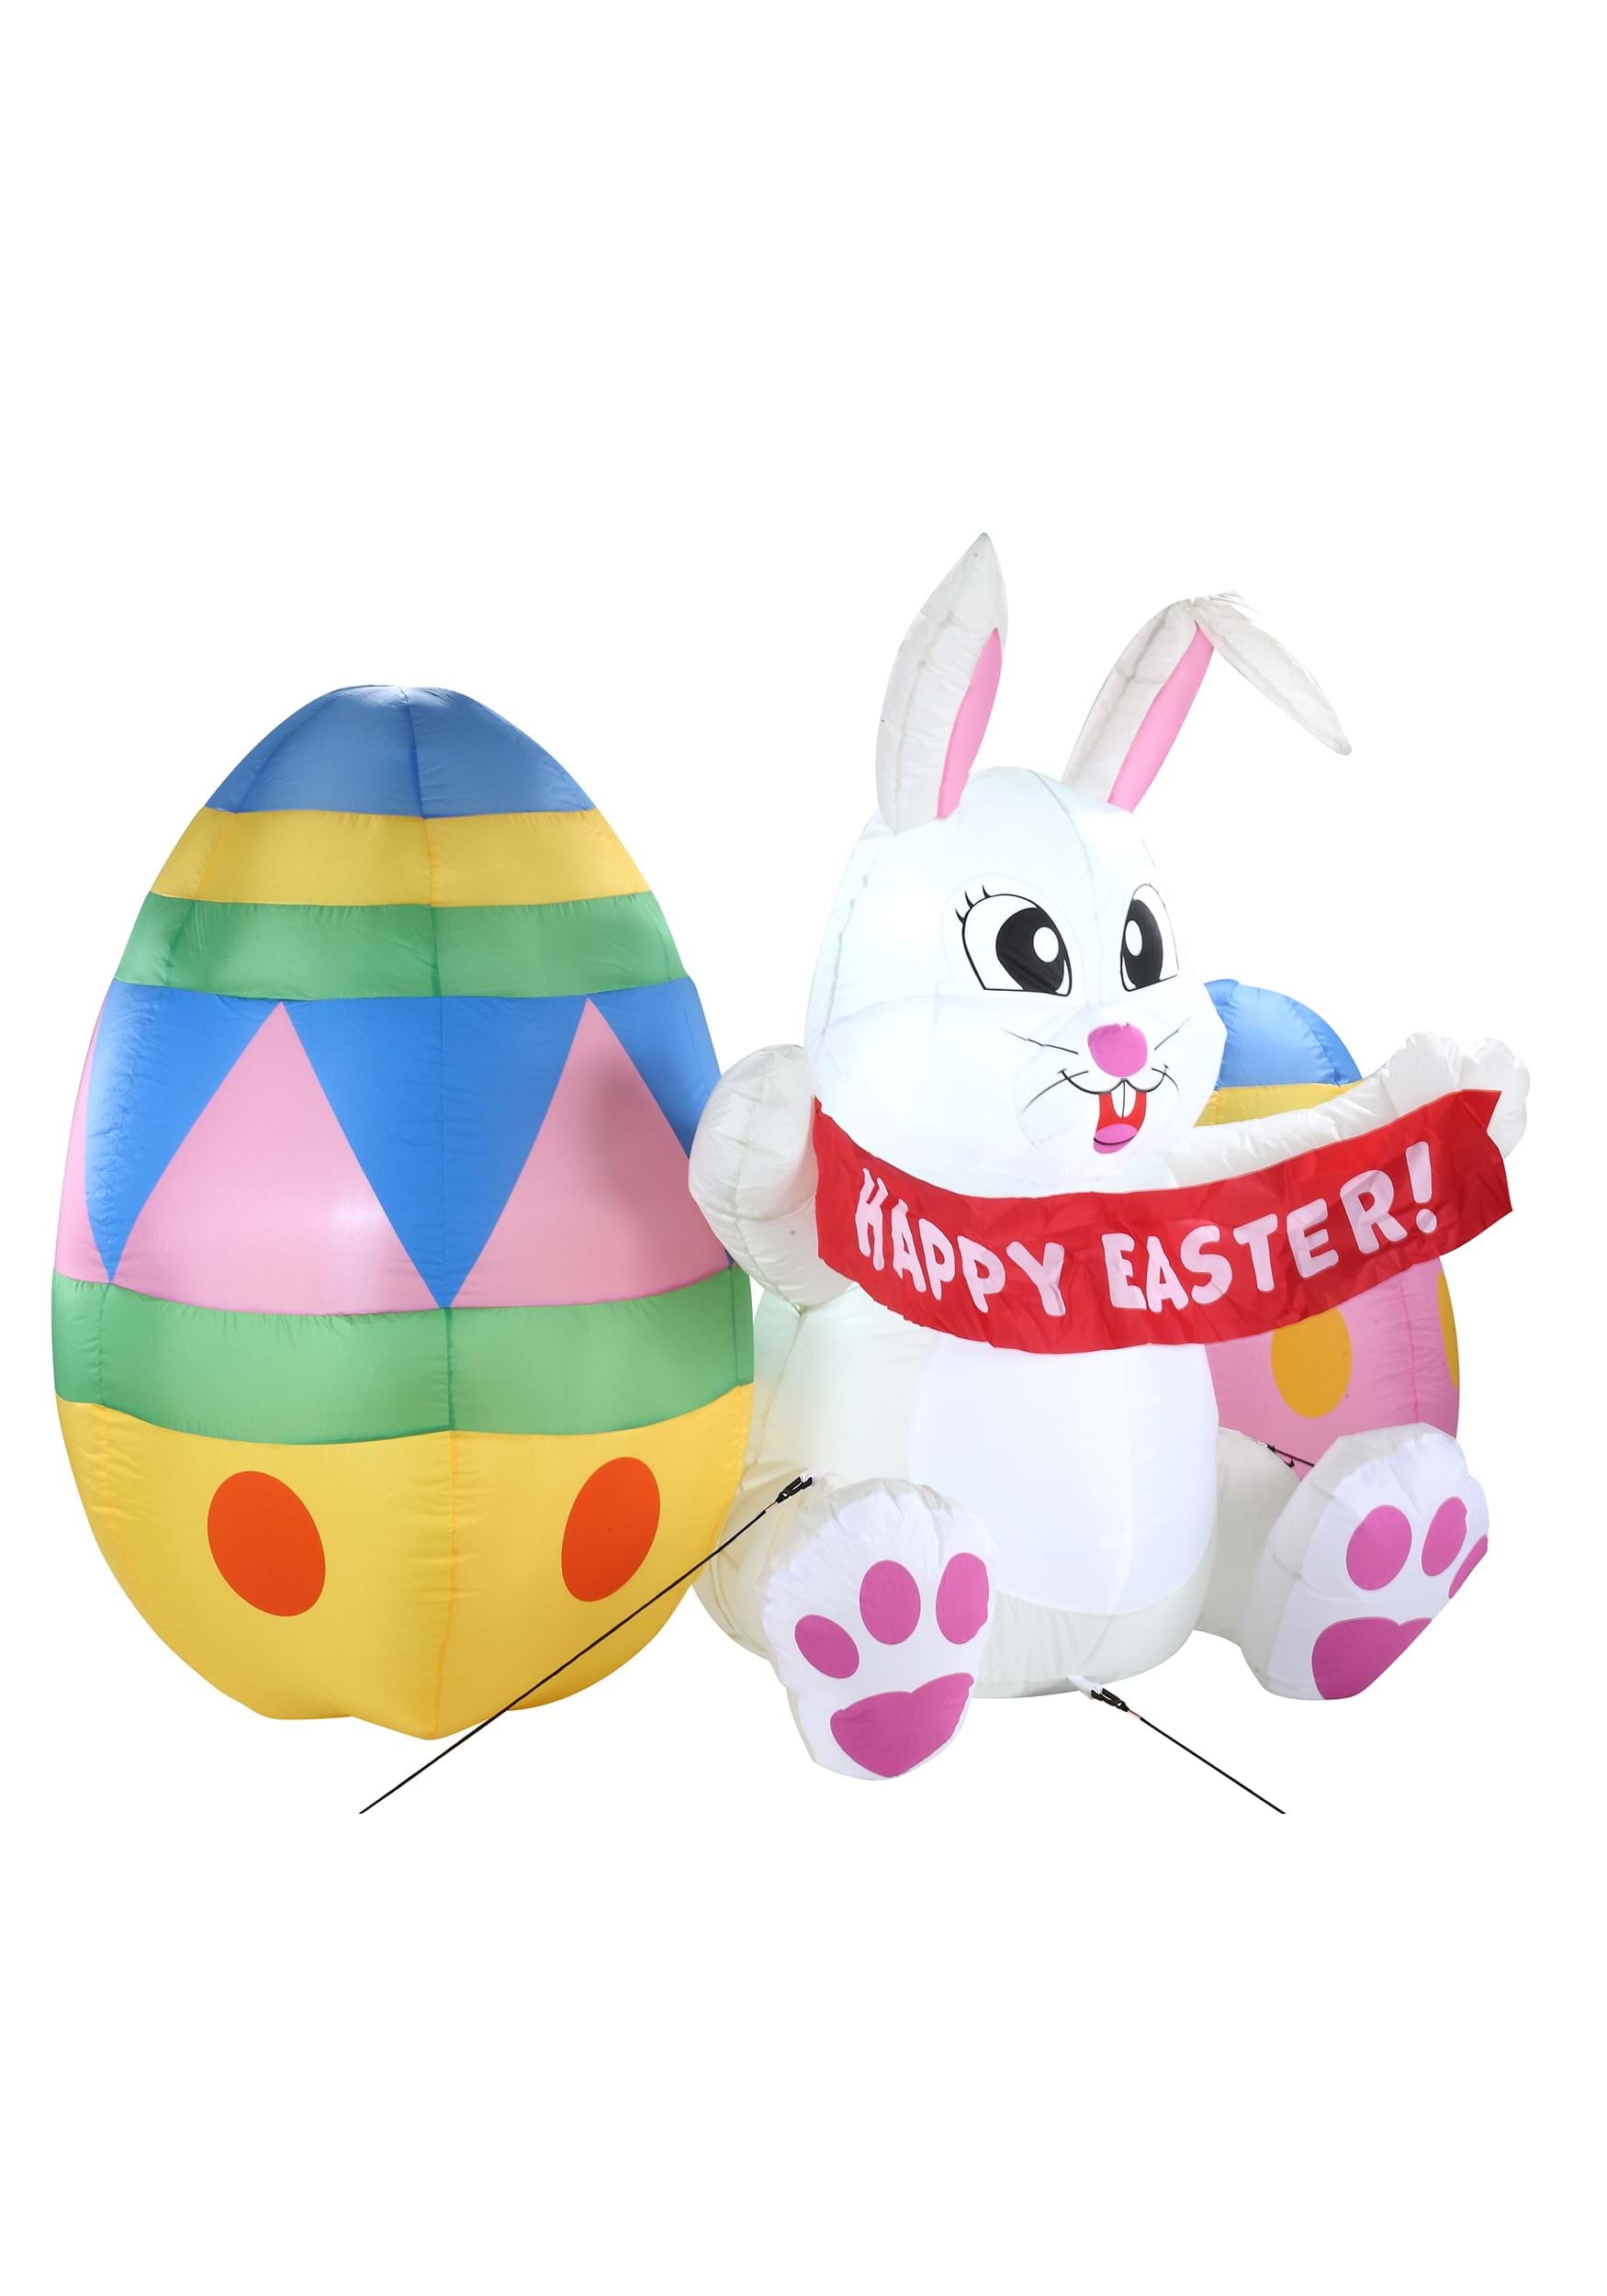 6 Foot Tall Easter Bunny Large Inflatable Decoration